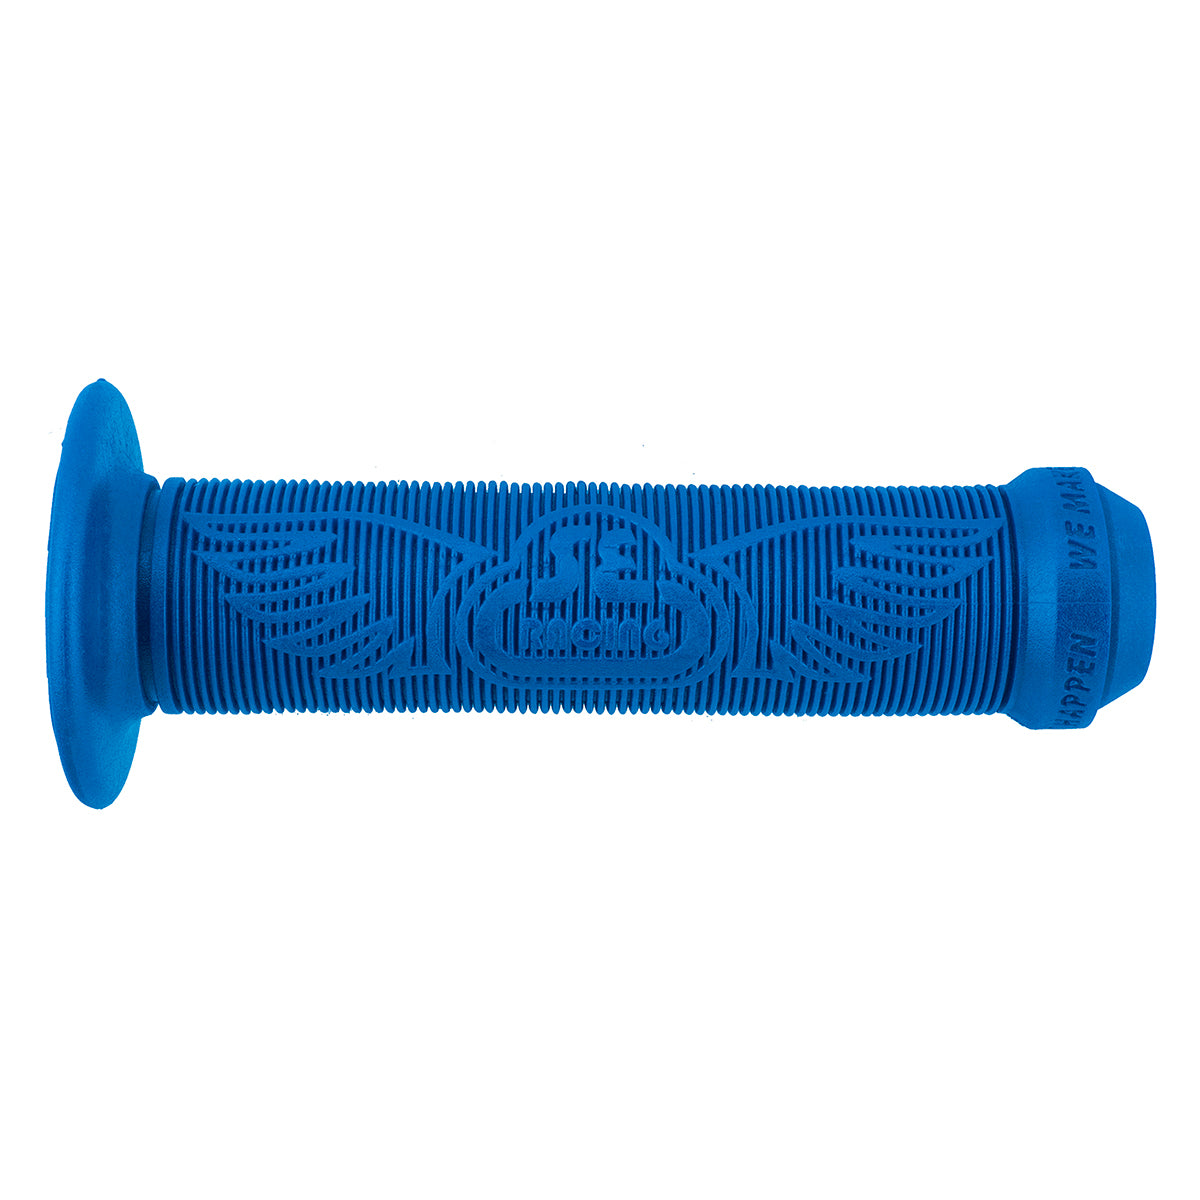 SE Racing Wing BMX Grips - Flanged - Blue